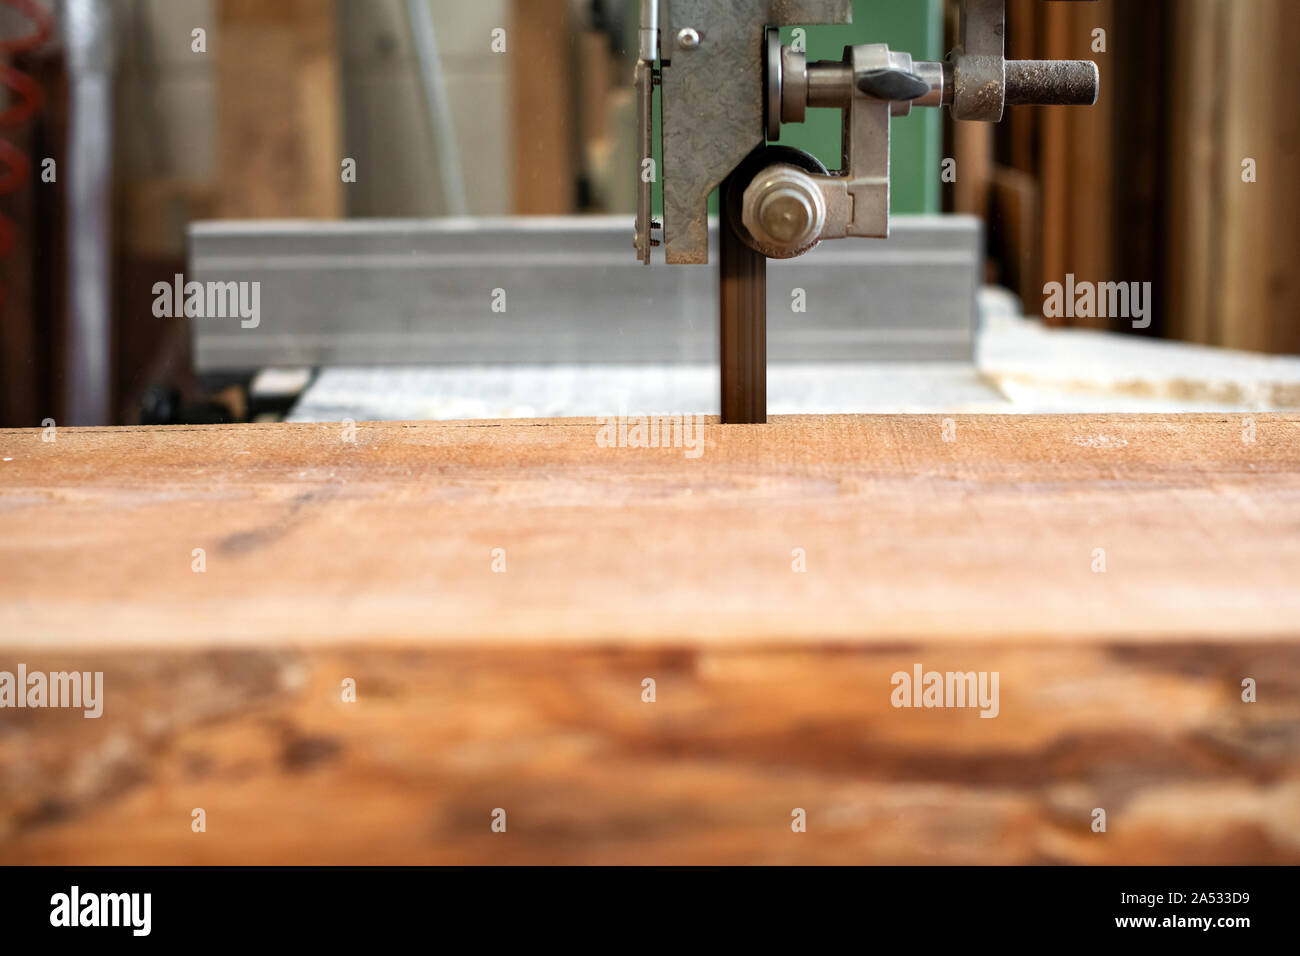 Sawing wood using a band saw in a woodworking or carpentry workshop in a close up on the wooden plank and the band of the saw Stock Photo